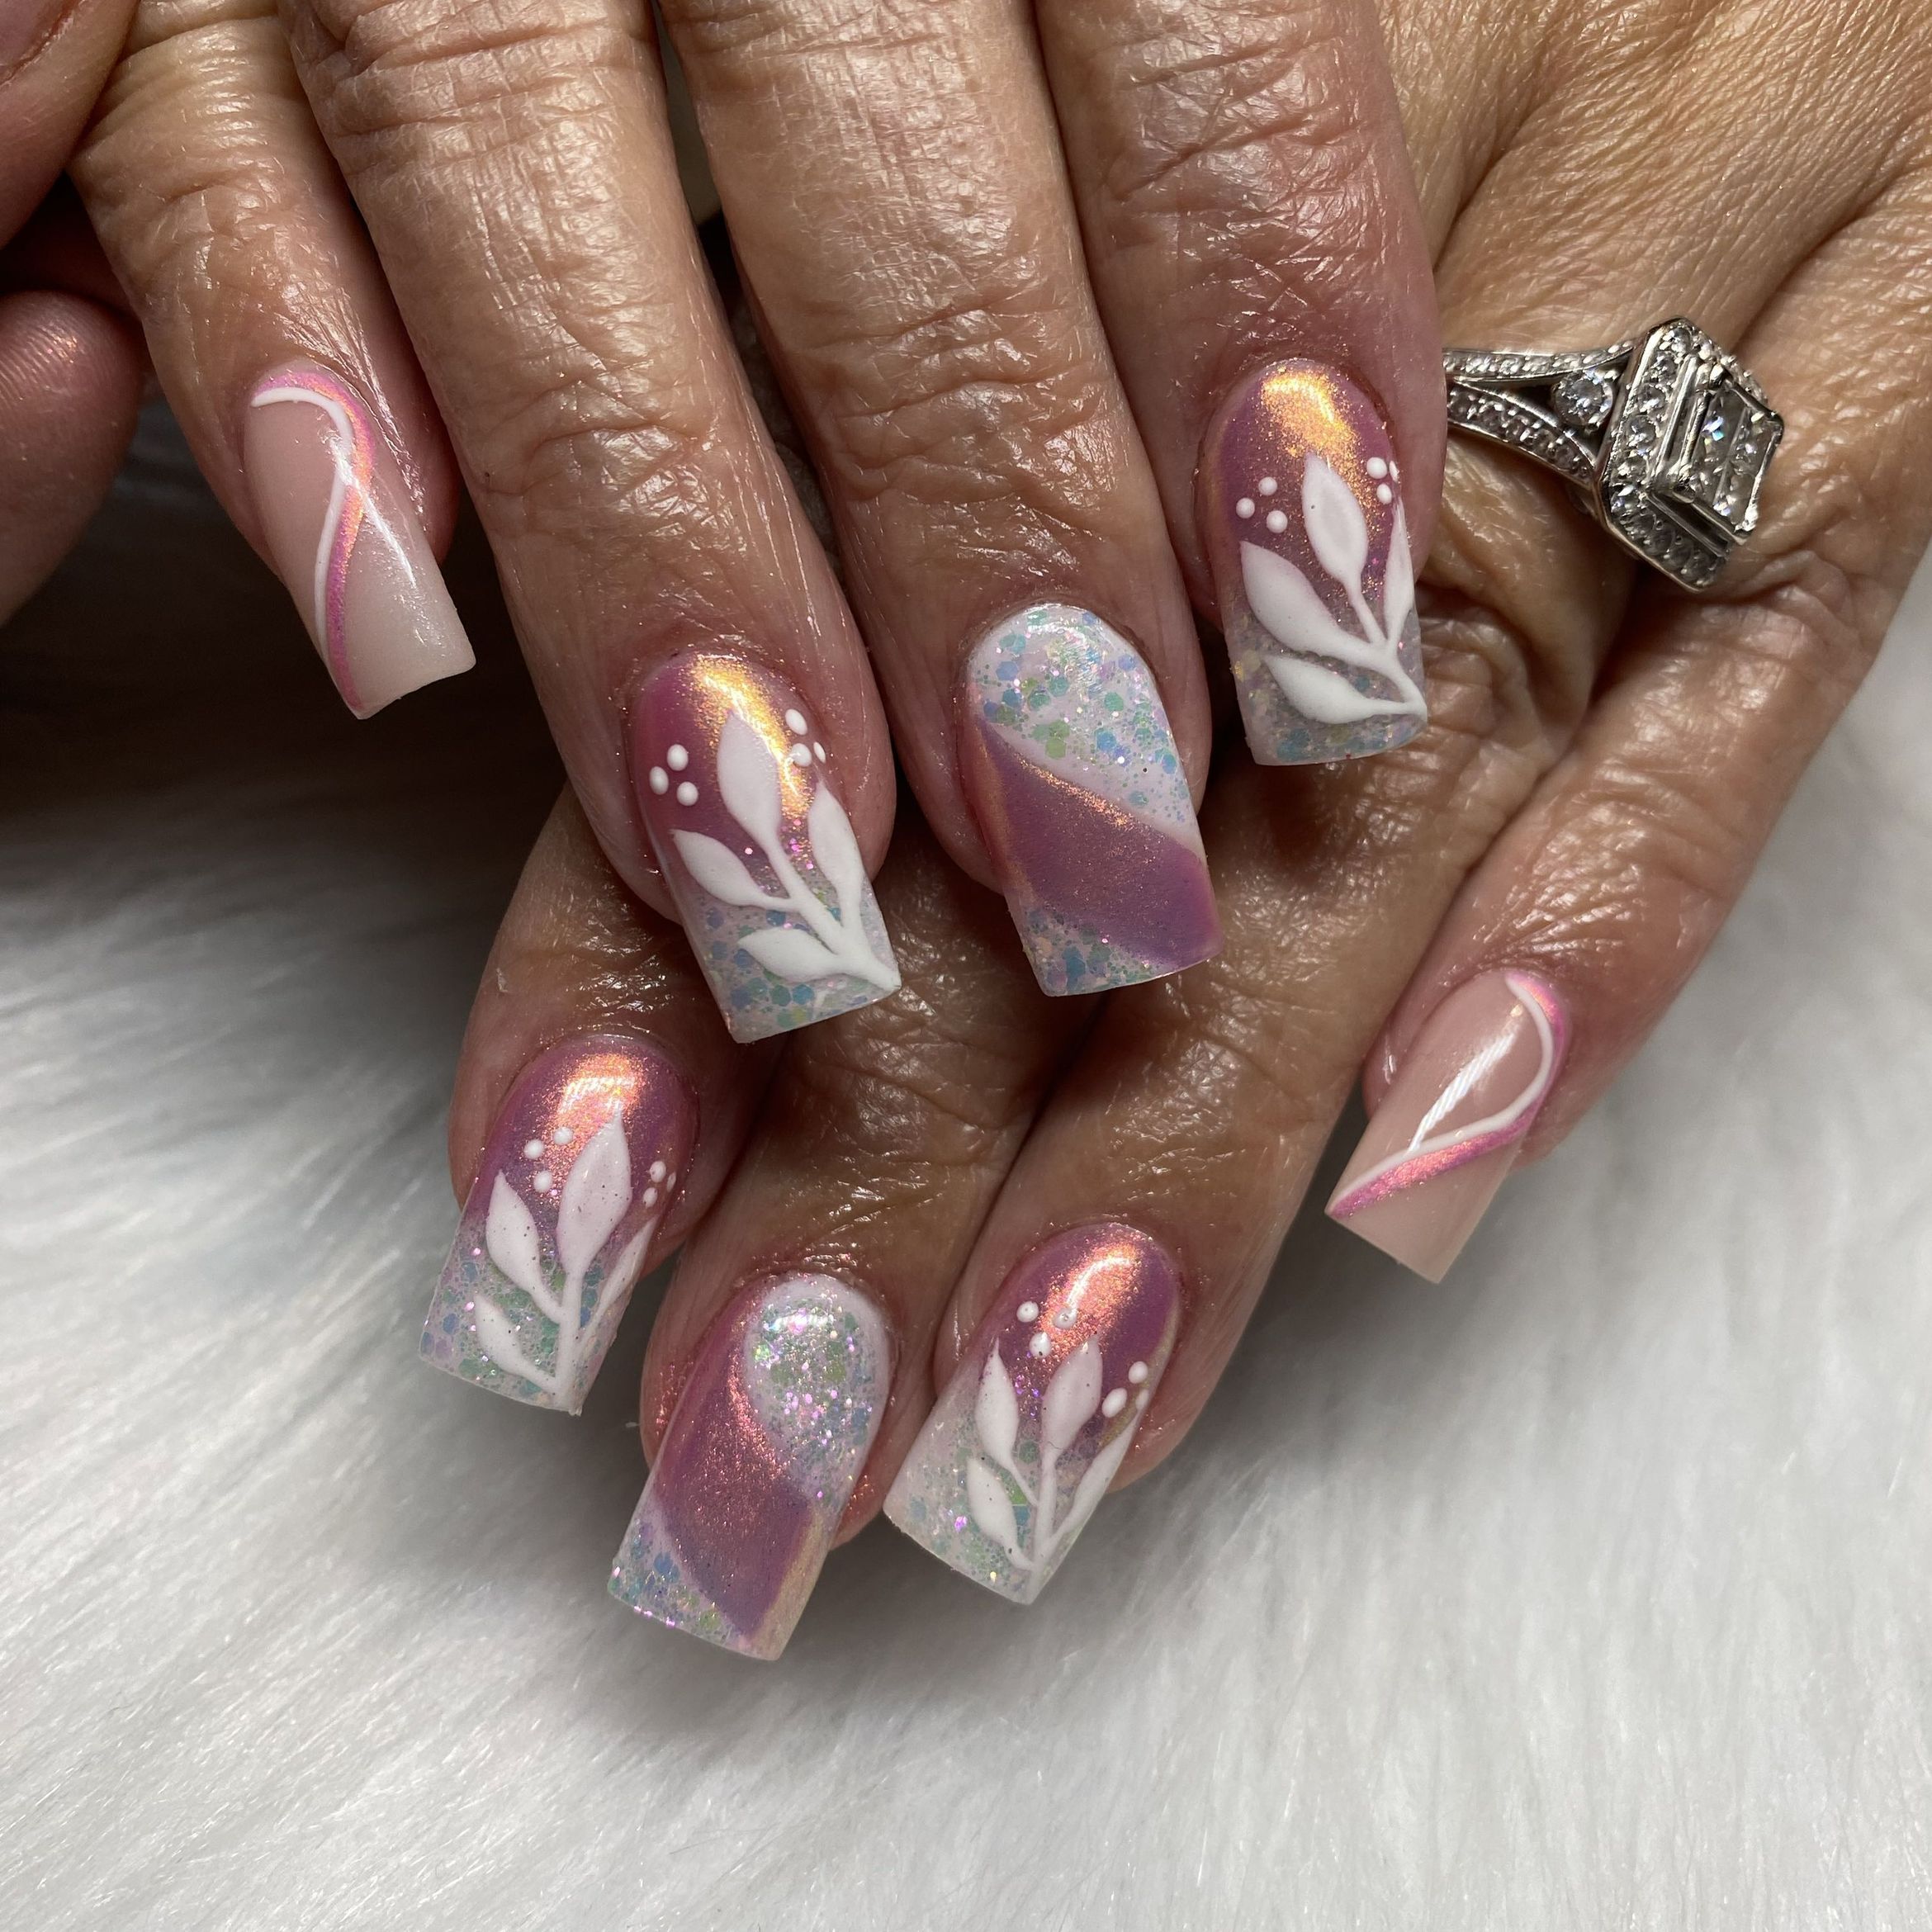 Nails By Julia, Lux nail bar, Floresville, 78114